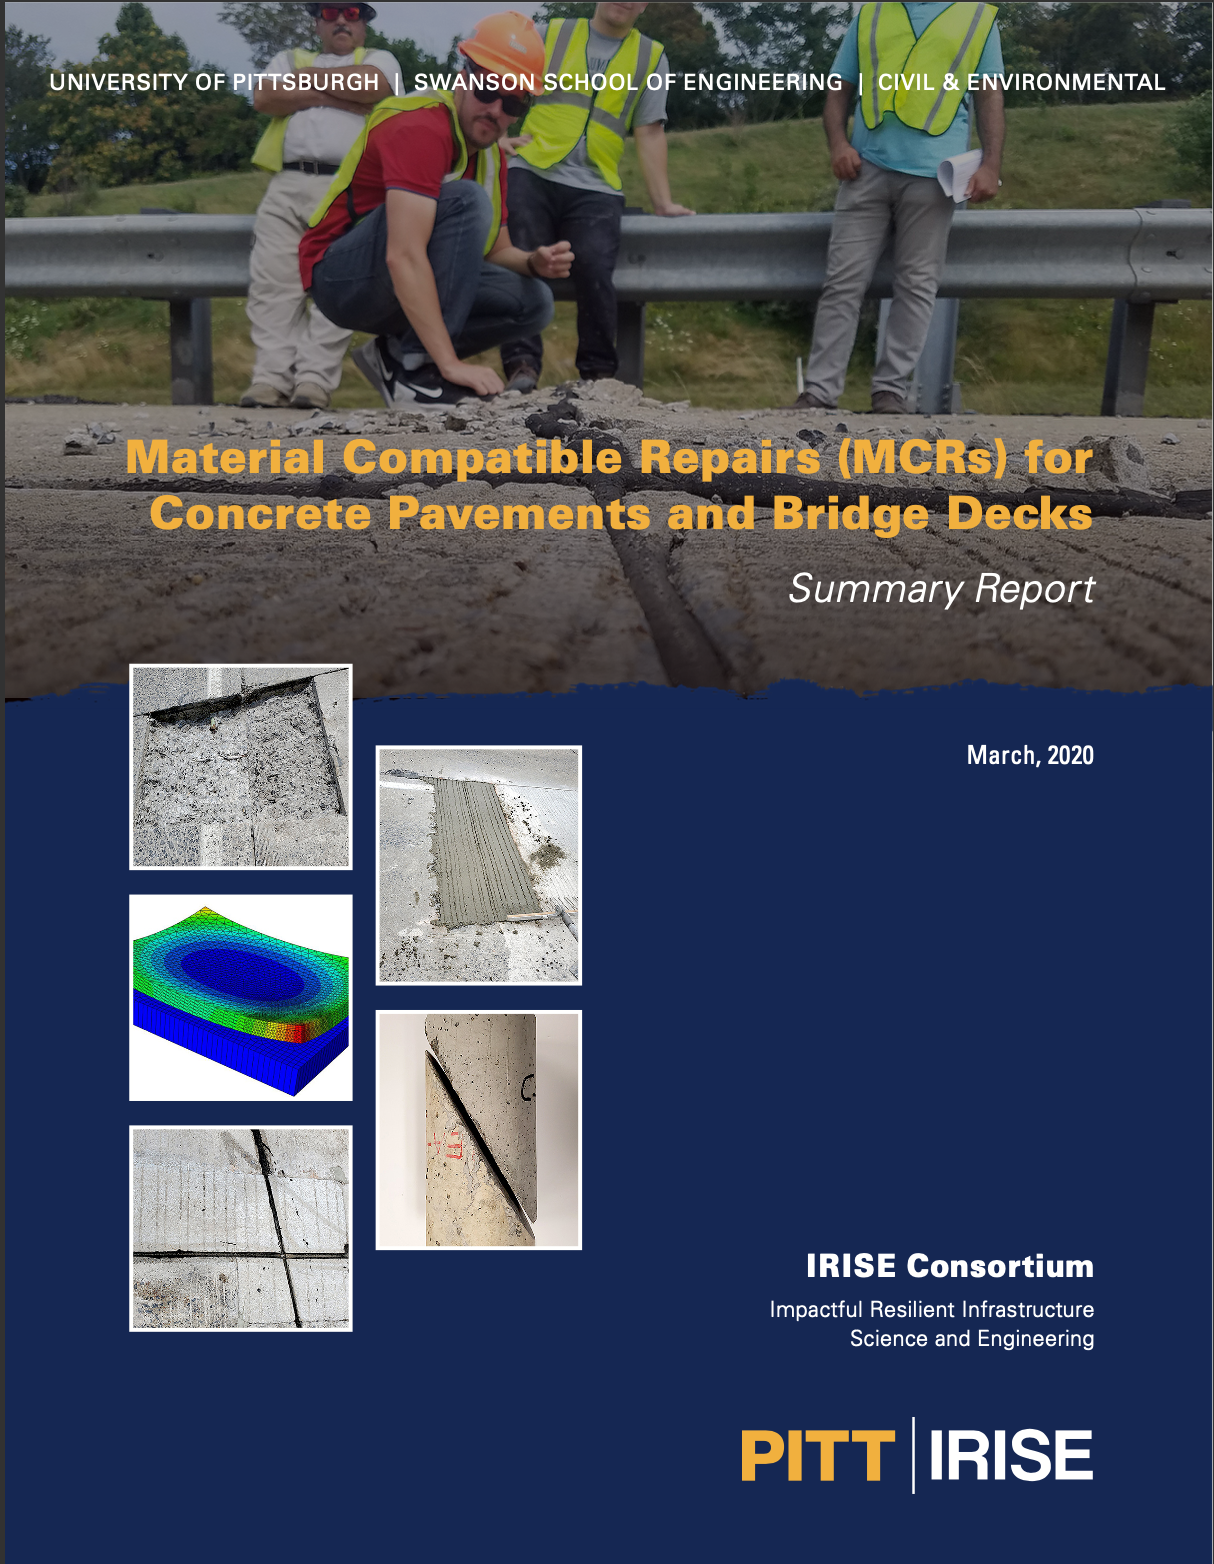 Material Compatible Repairs for concrete pavements and bridge decks summary report